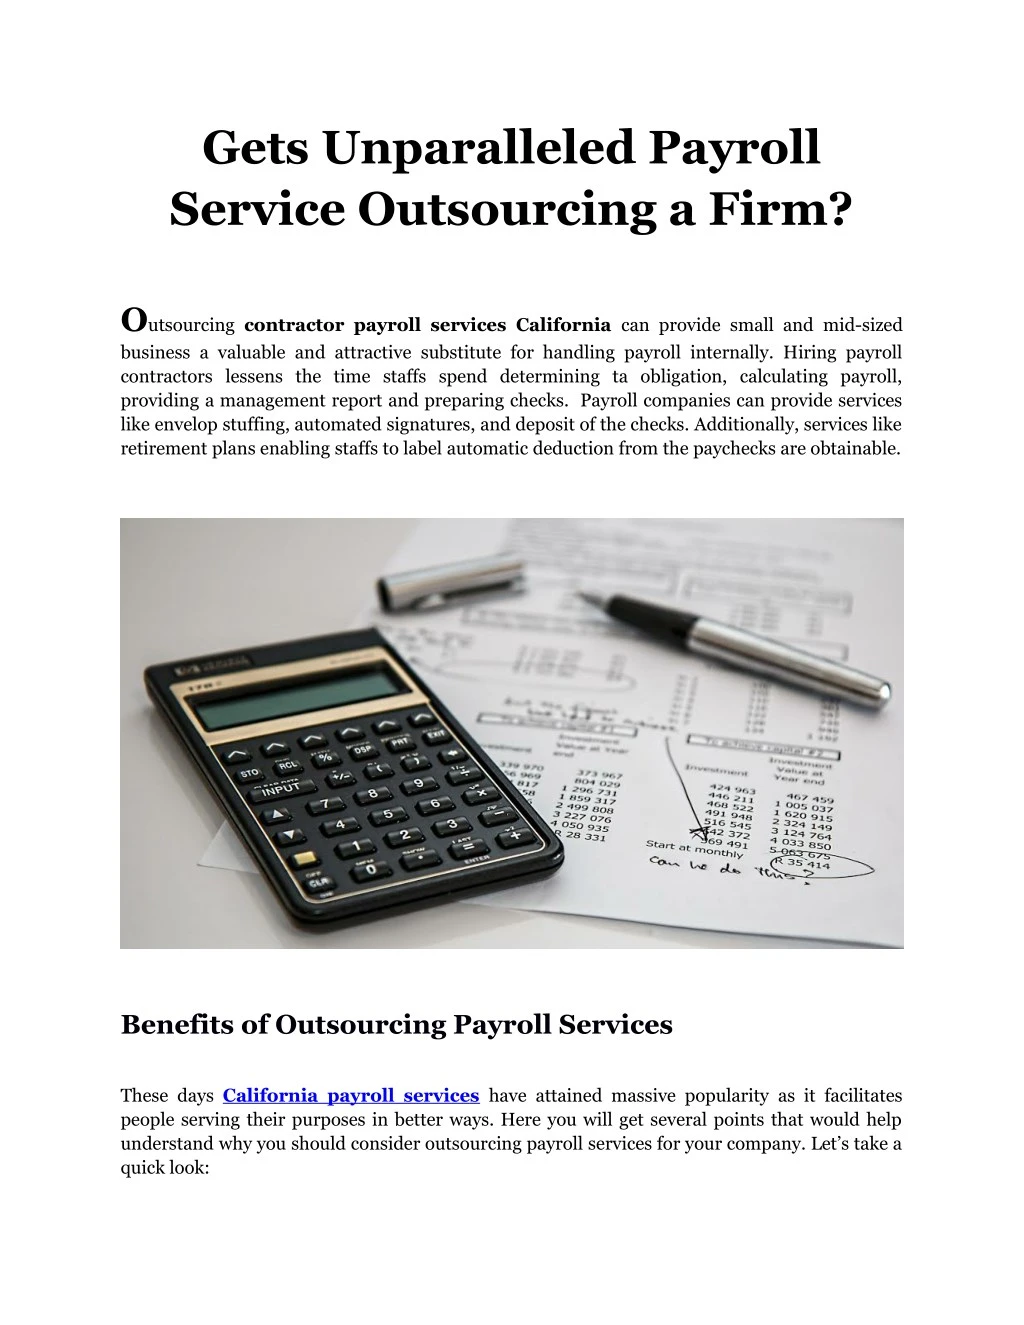 gets unparalleled payroll service outsourcing